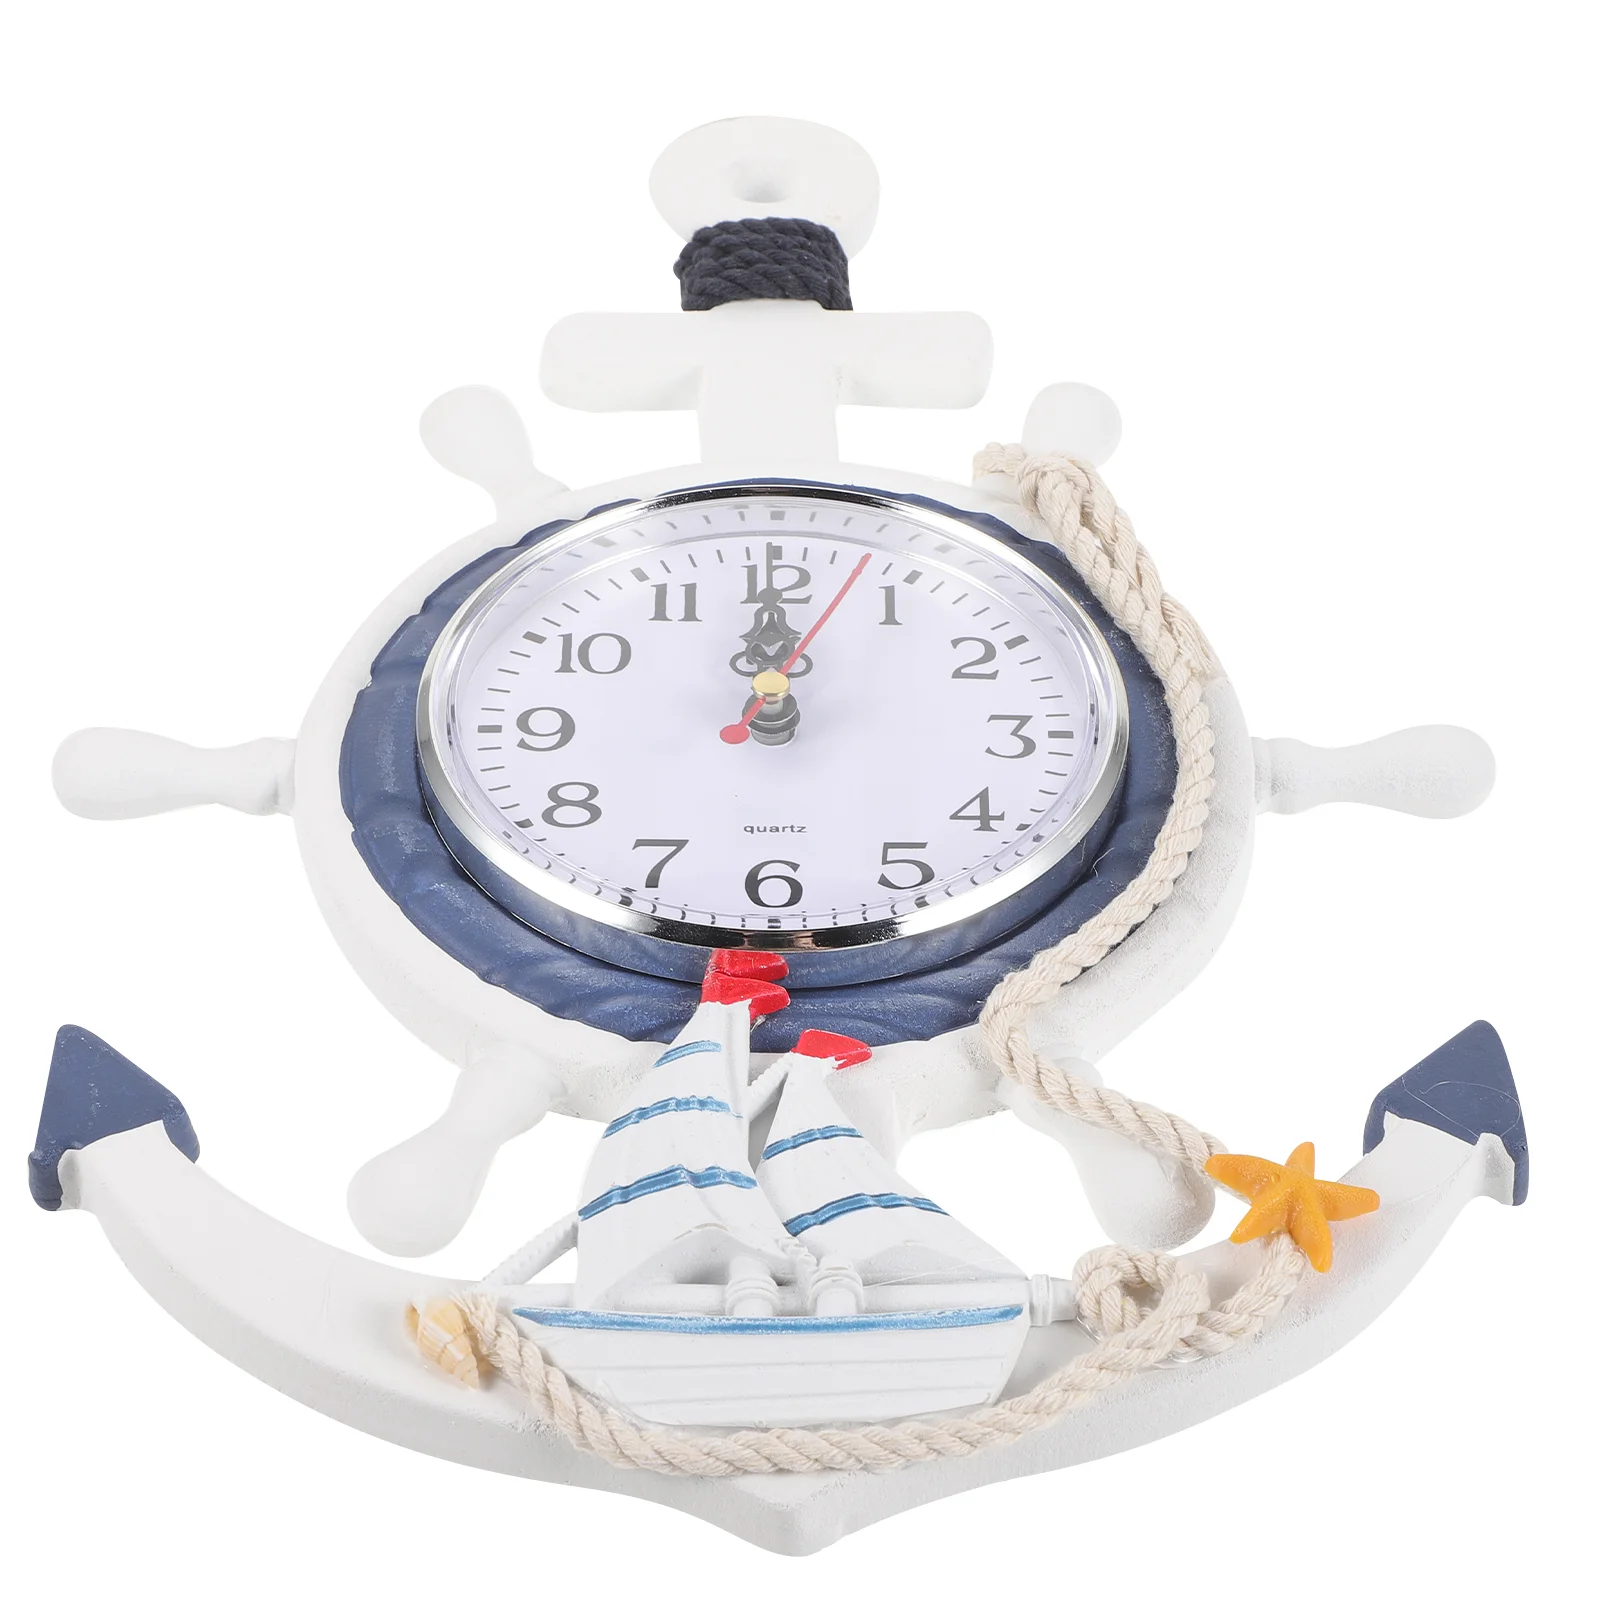 

Nautical Wall Clock Mediterranean Style Anchor Wall Clock Ocean Style Wall Hanging Clock Decoration Ornament for Office Kitchen